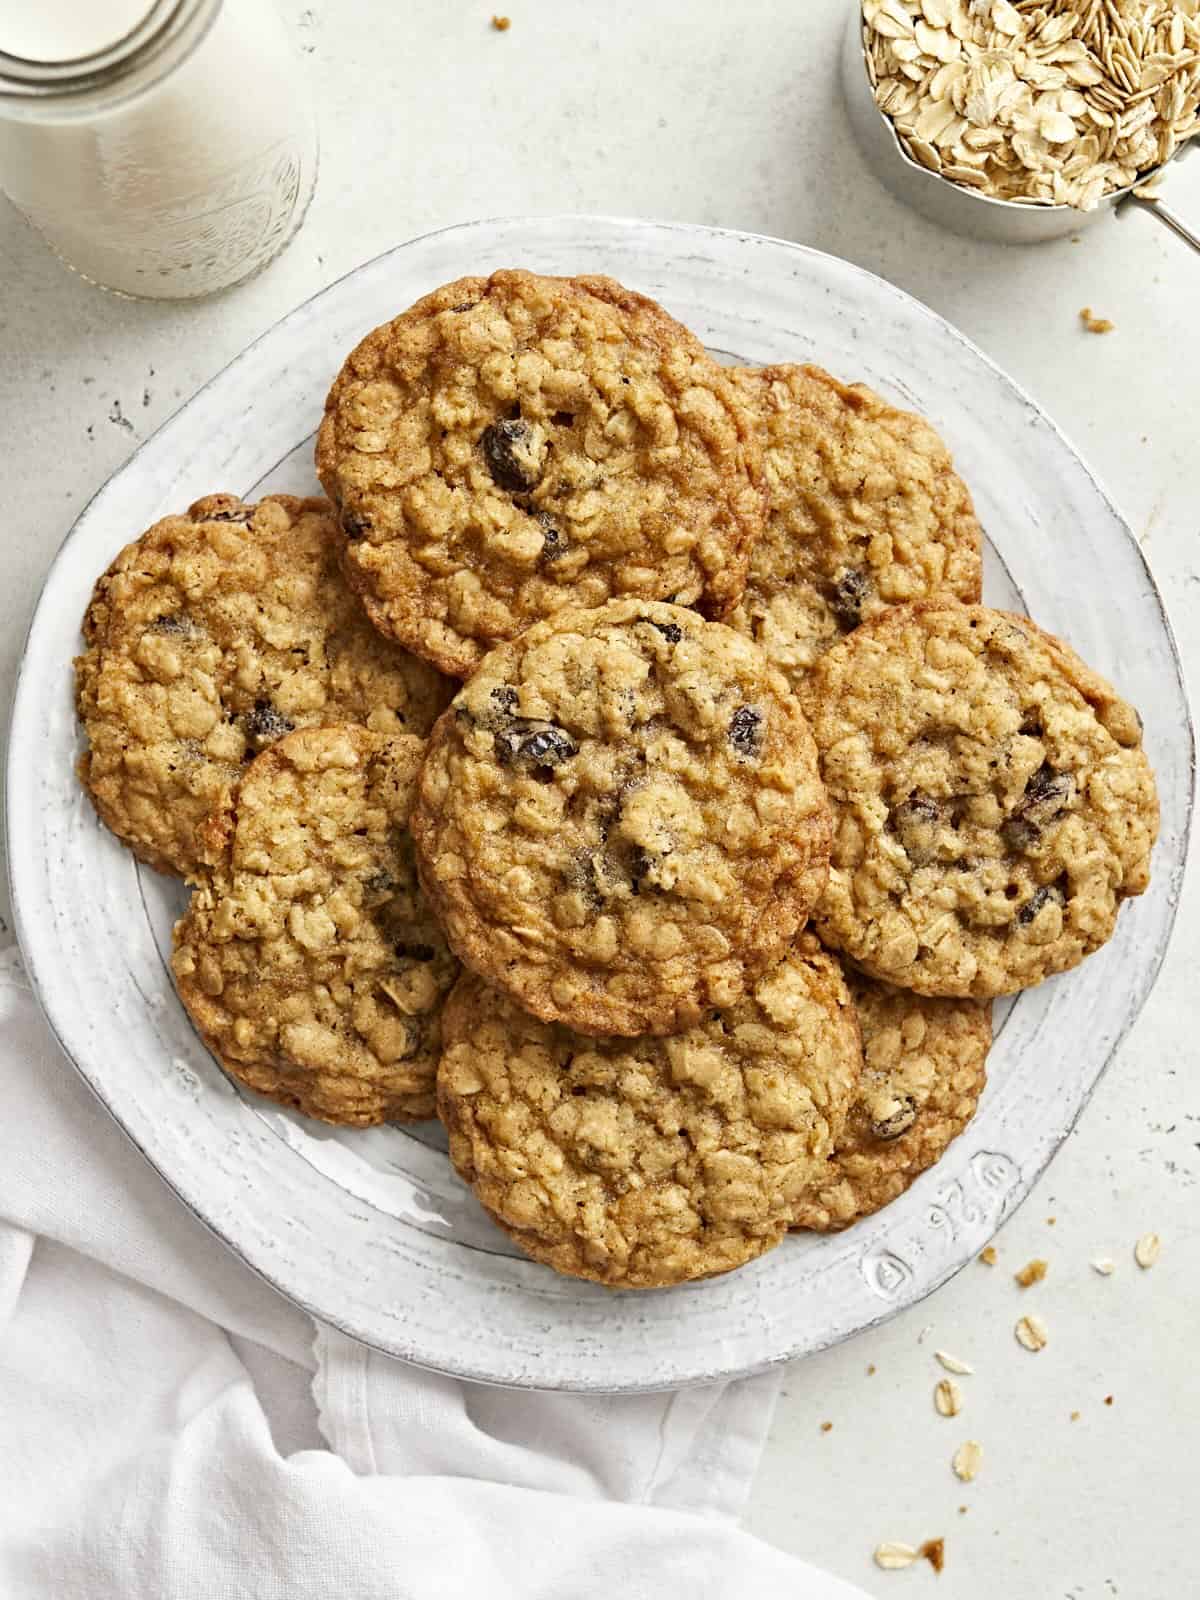 Overhead view of a pile of oatmeal cookies on a plate with a white napkin and a cup of milk on the side.